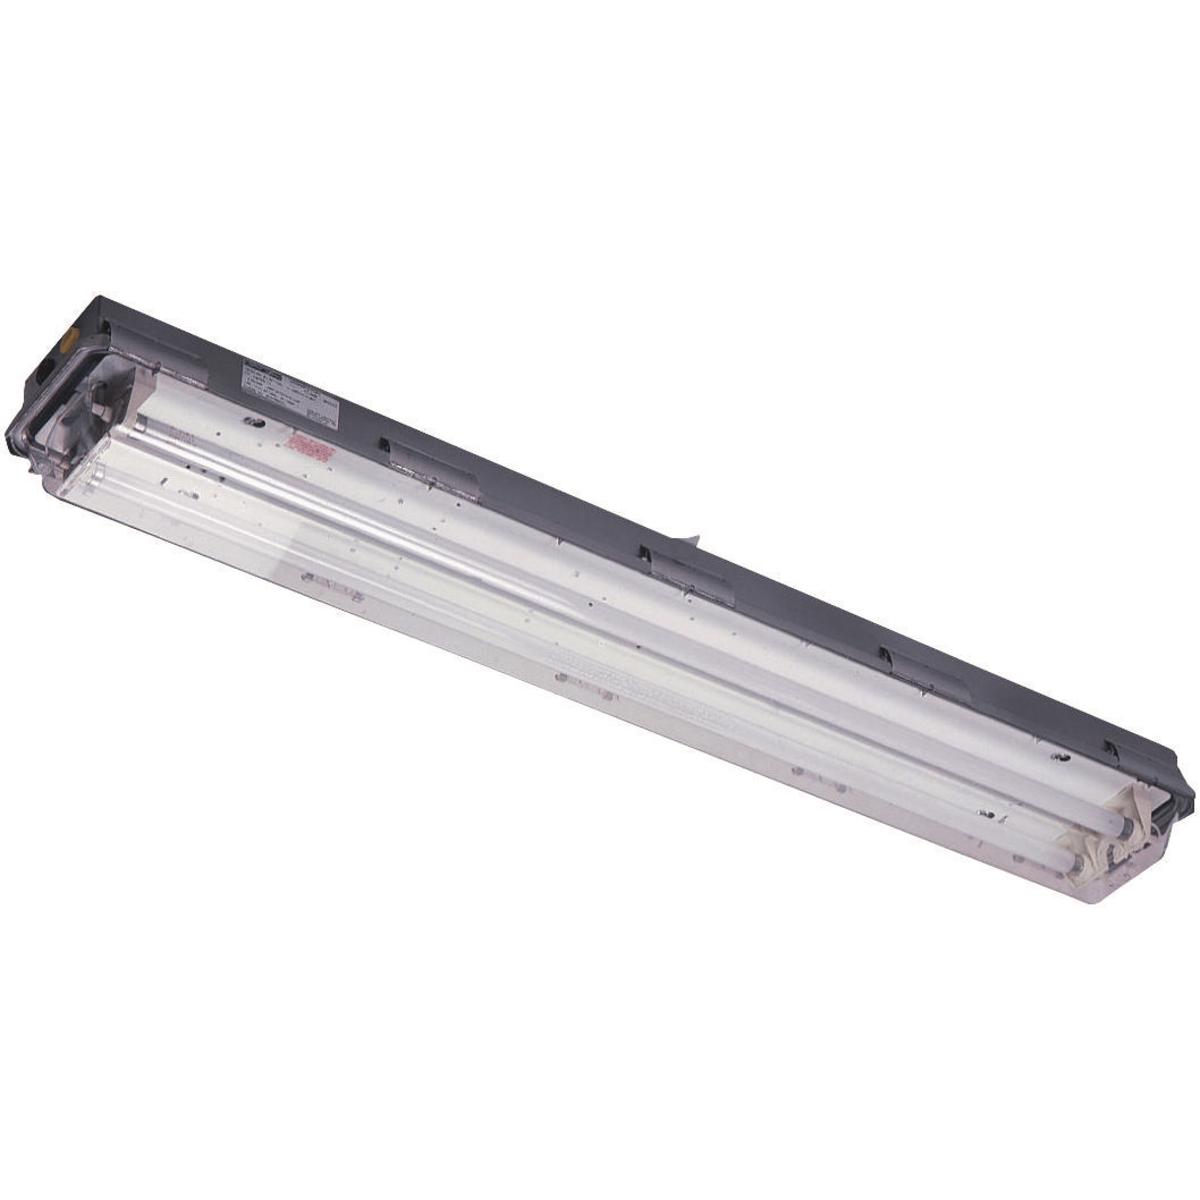 Hubbell LZ2SE1-55130 LZ2SE Series- Stainless Steel-  Emergency -55W 120-277V - 2' 1-Lamp Biaxial Electronic 50/60 Hz 0°F Start 4 -Pin  ; NEMA 4 & IP66 rated enclosure ; Housing-one piece fiberglass reinforced polyester or 316 Stainless Steel ; Clear Lexan® impact resistant po